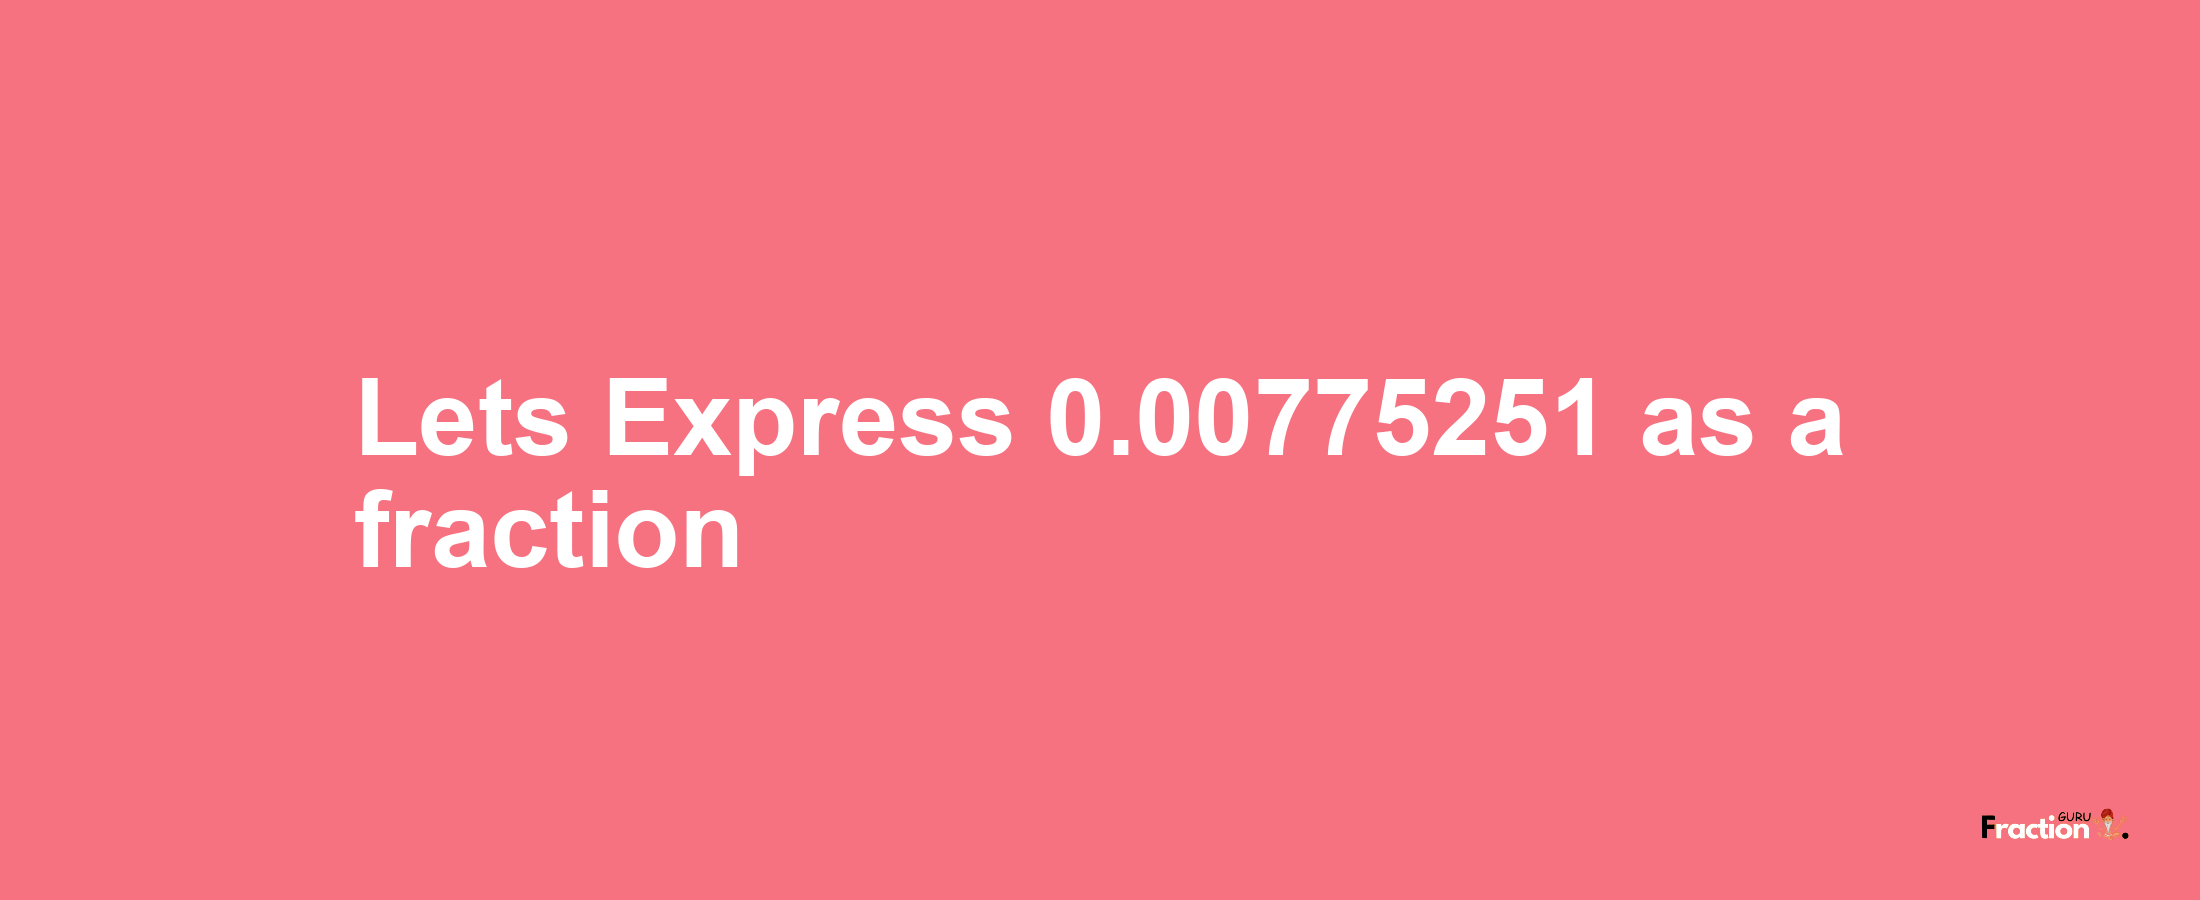 Lets Express 0.00775251 as afraction